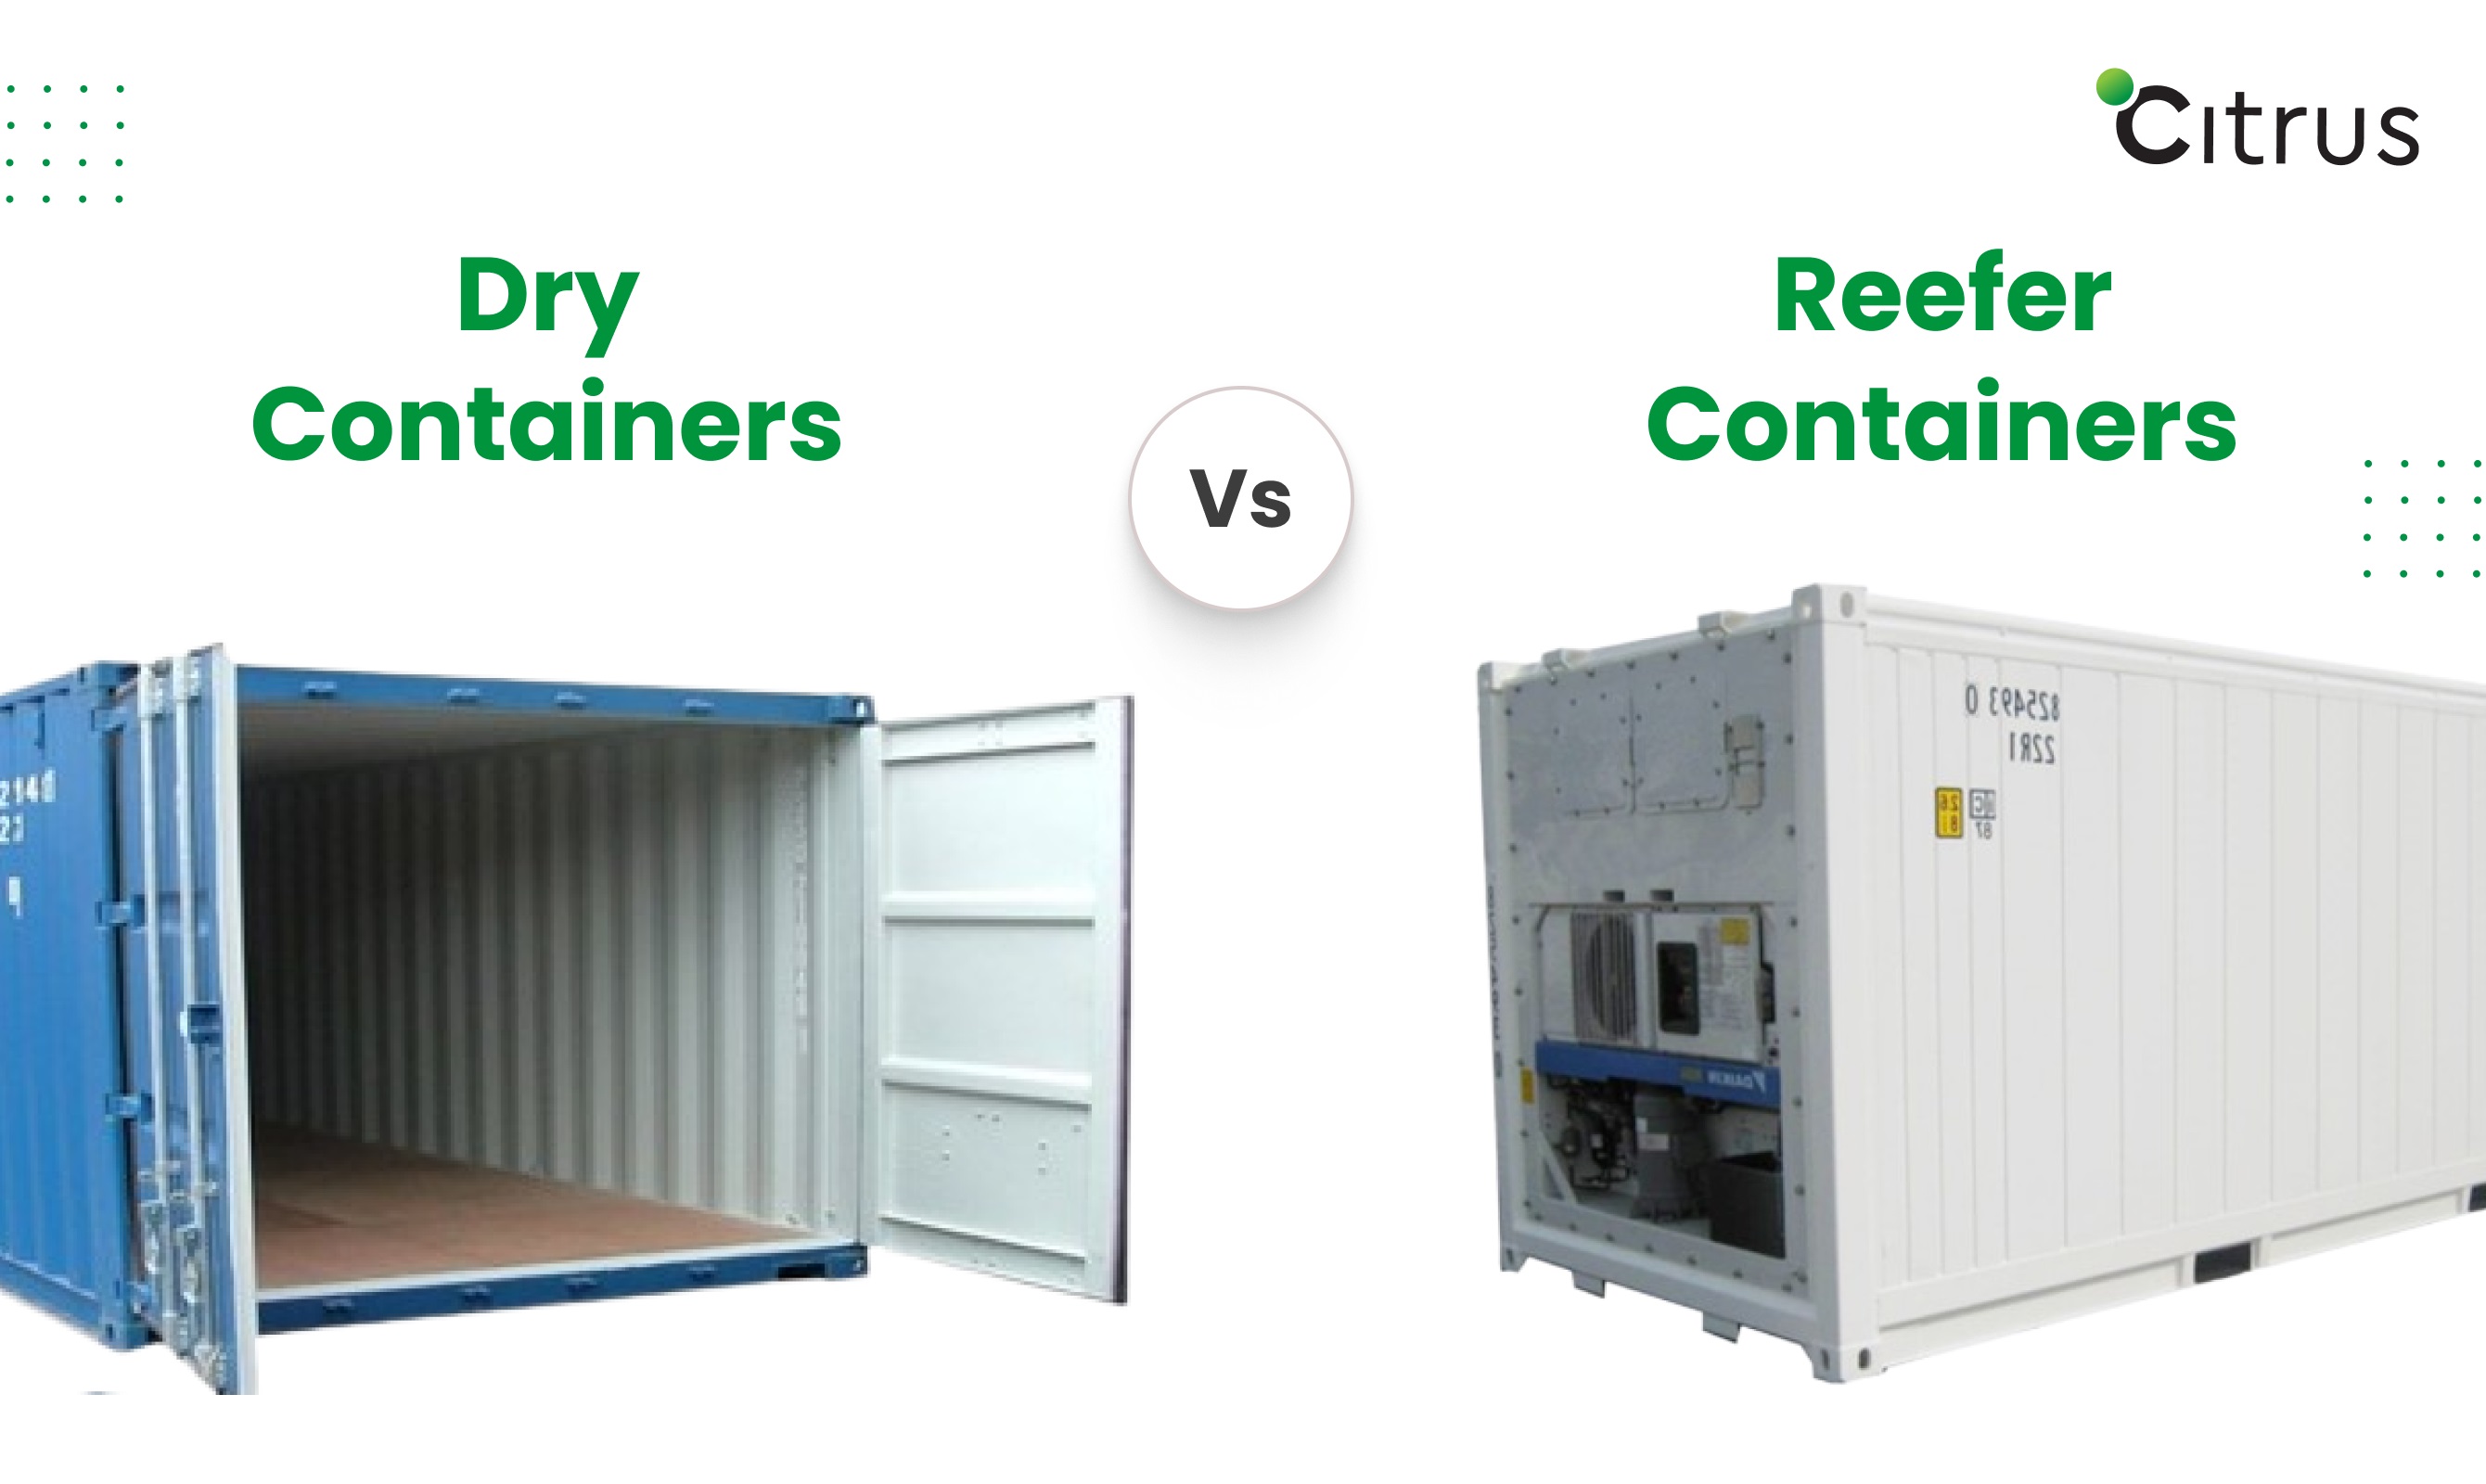 Reefer Container vs. Dry Container: What is the difference?